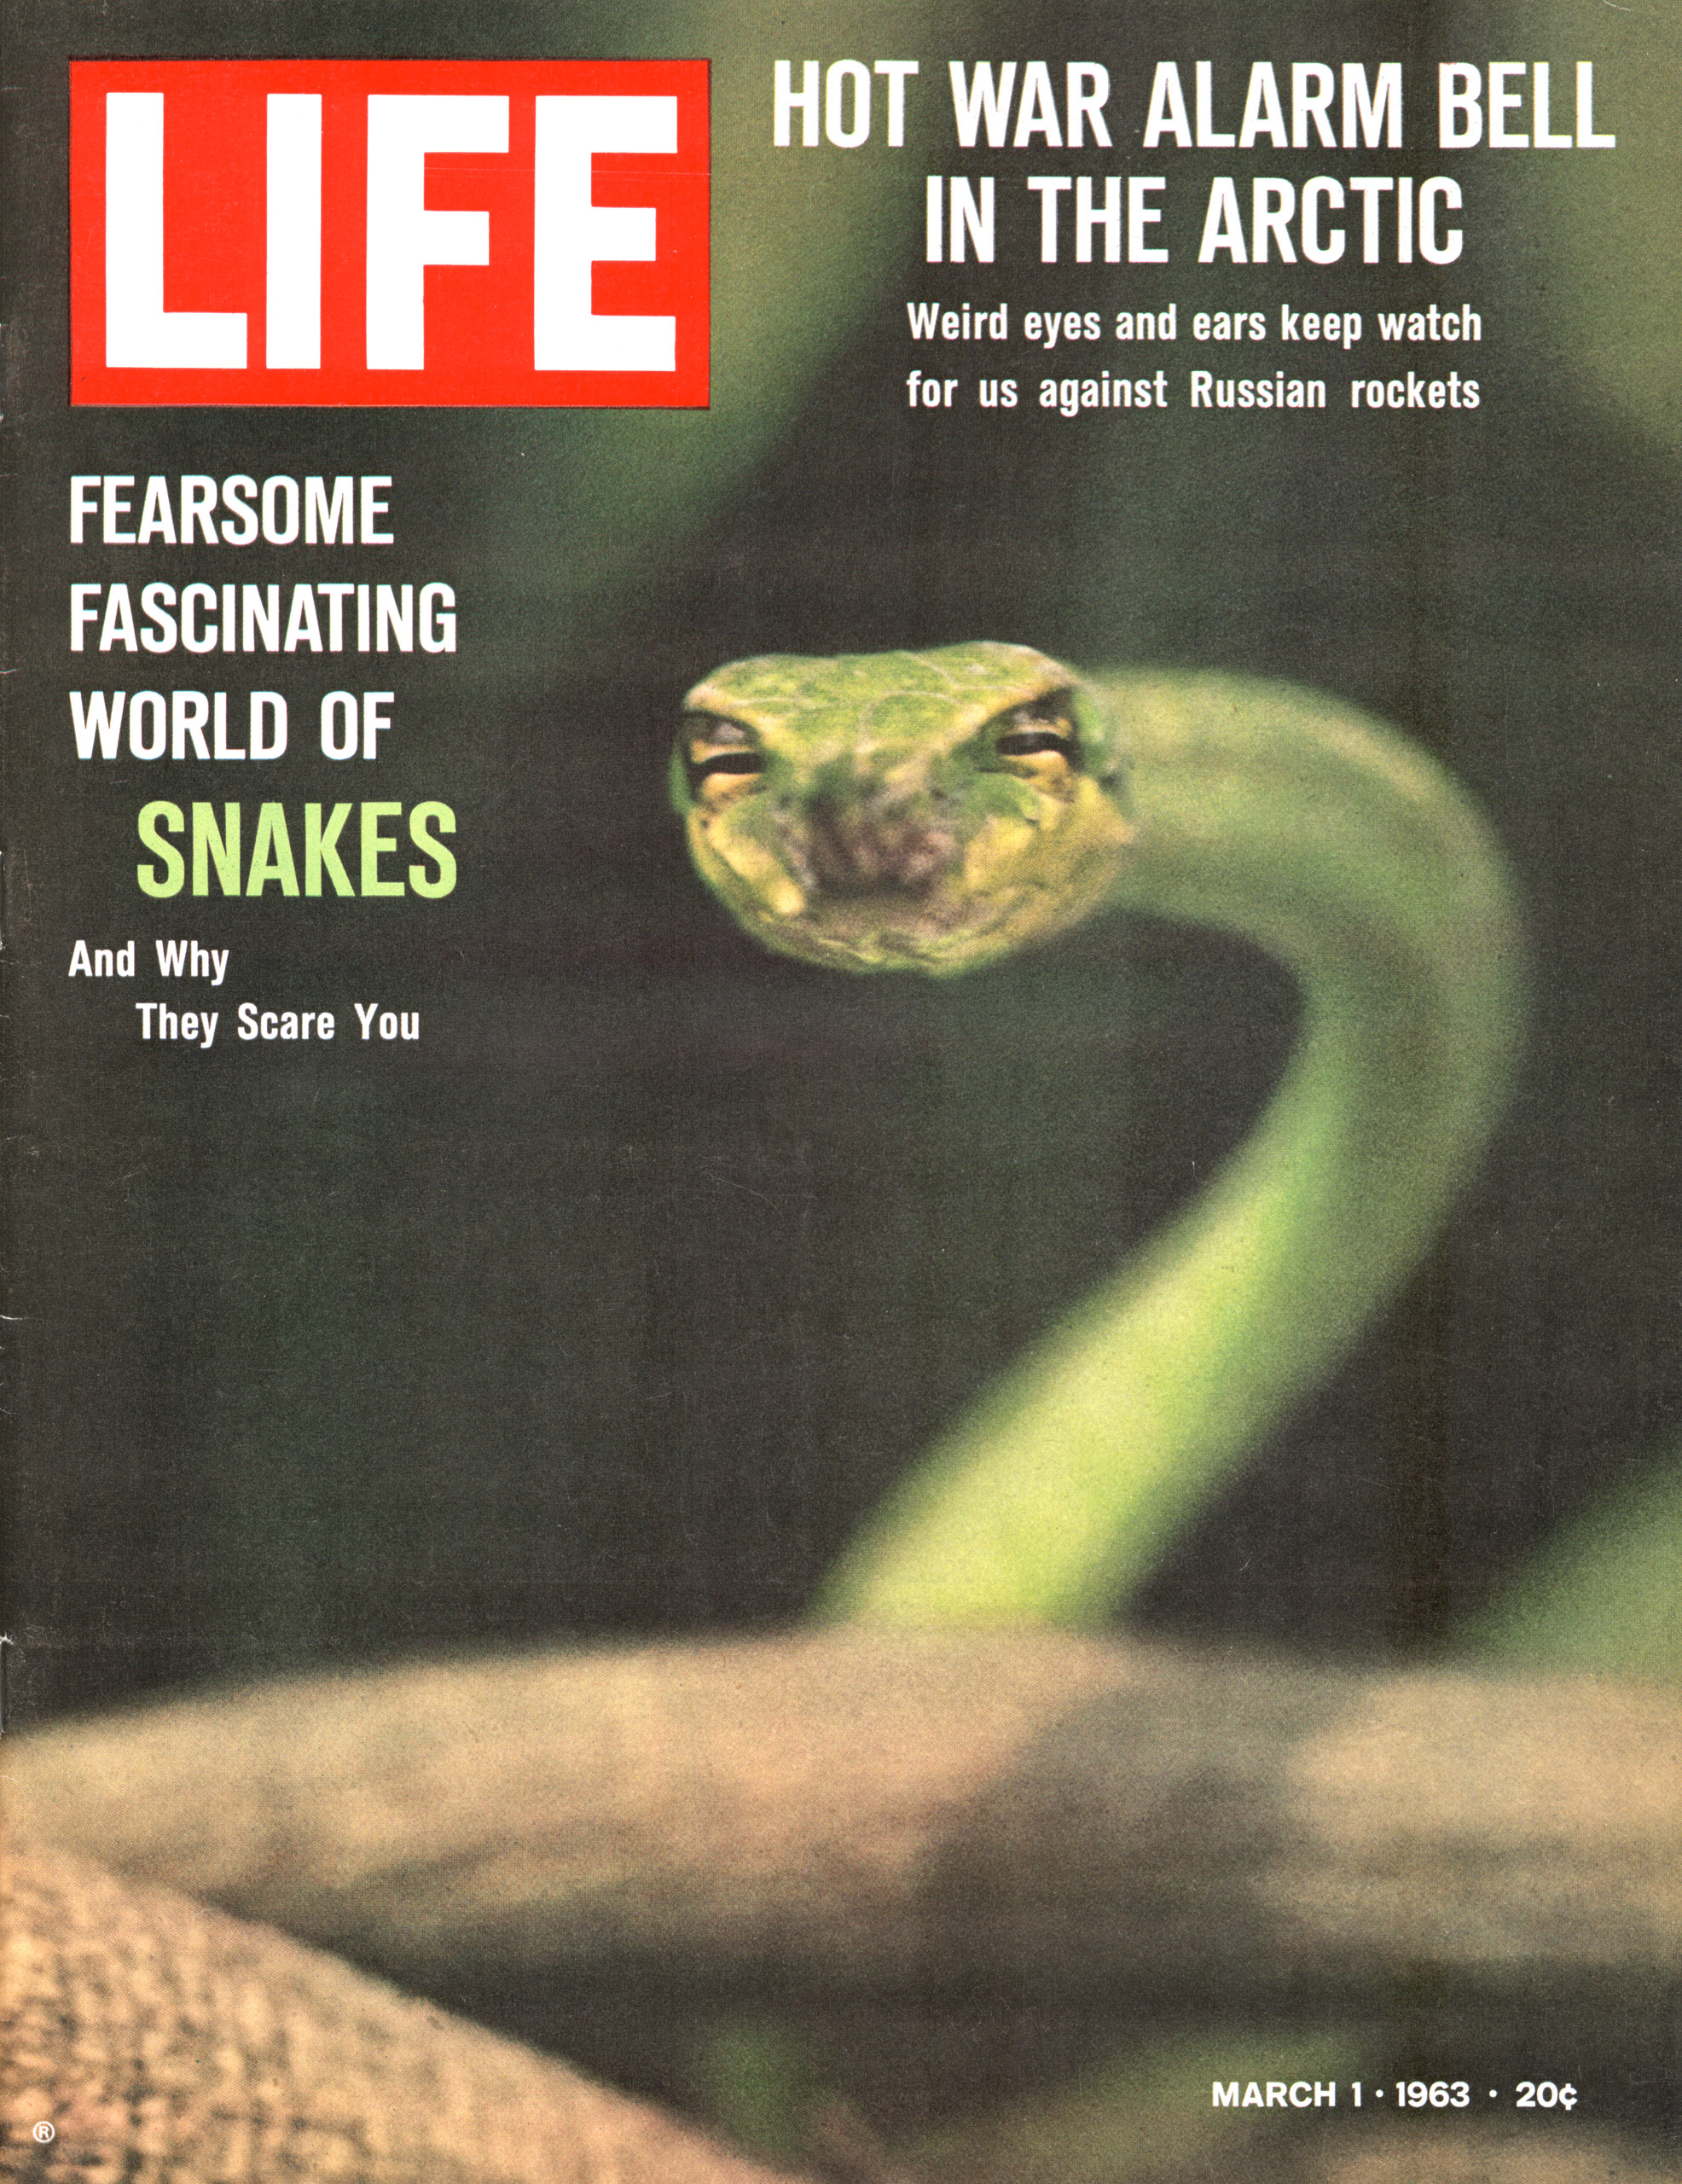 March 1, 1963 LIFE Magazine cover